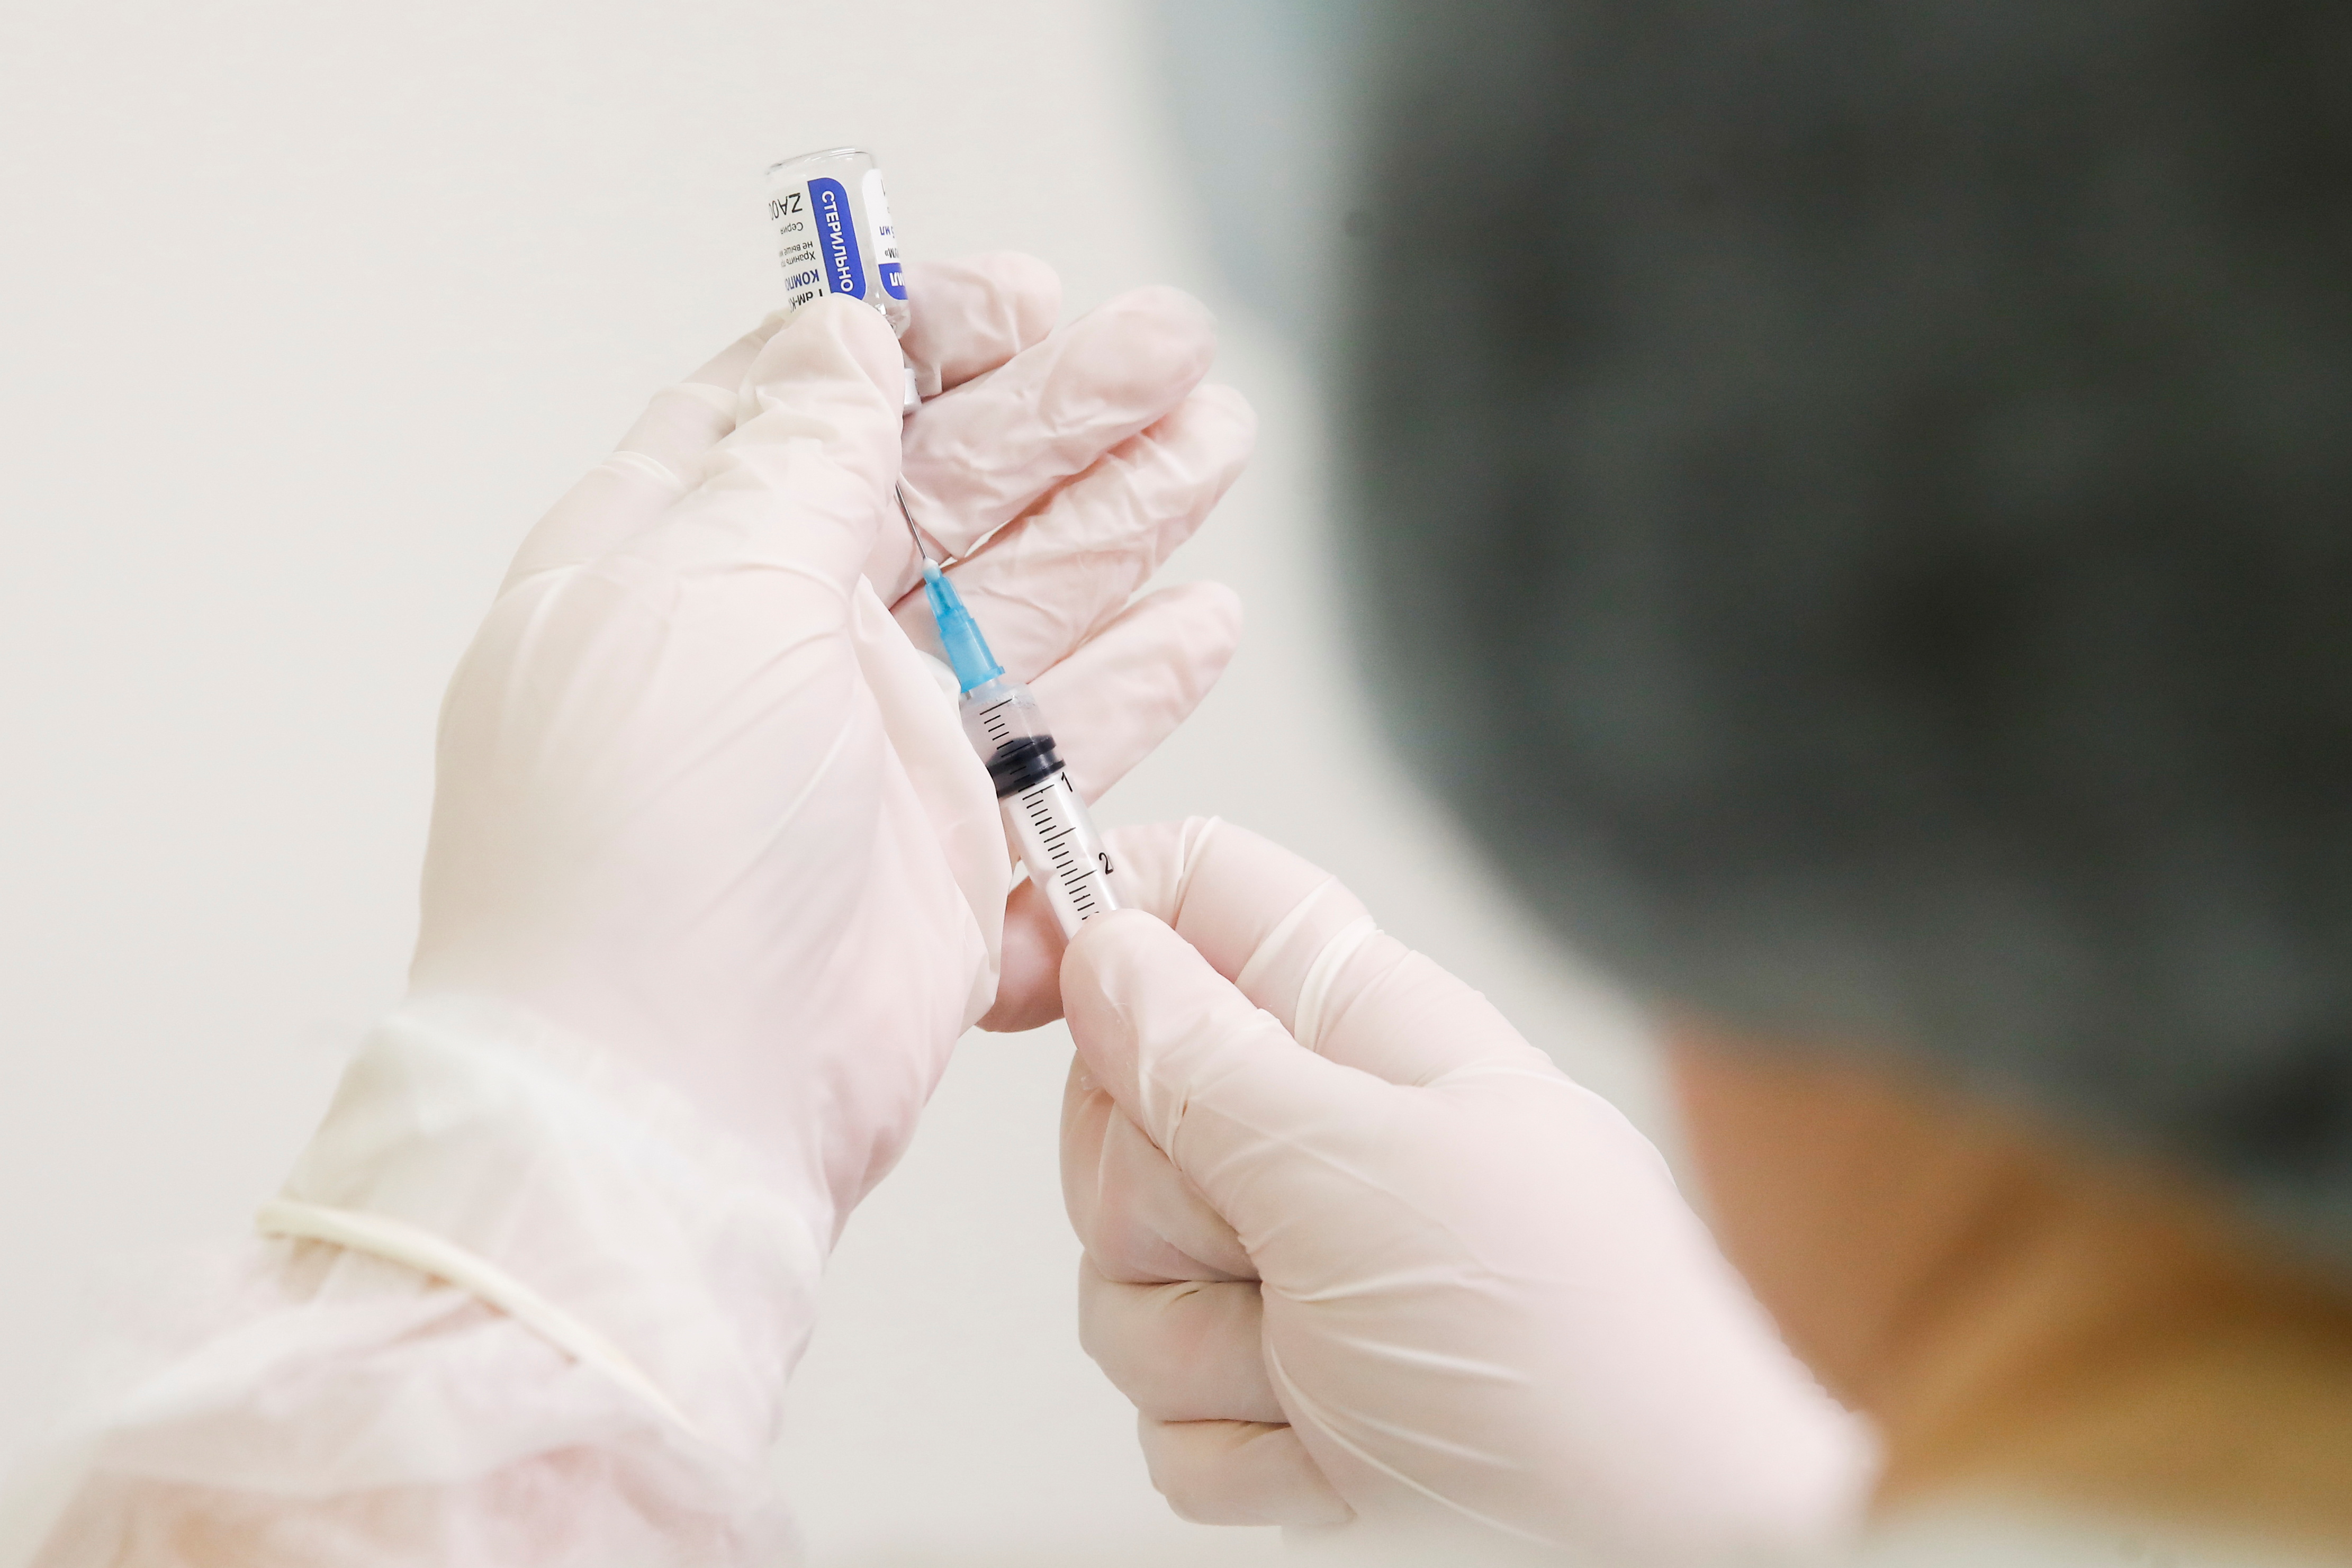 A healthcare worker fills a syringe with a dose of Sputnik V (Gam-COVID-Vac) vaccine against the coronavirus disease (COVID-19) in Moscow